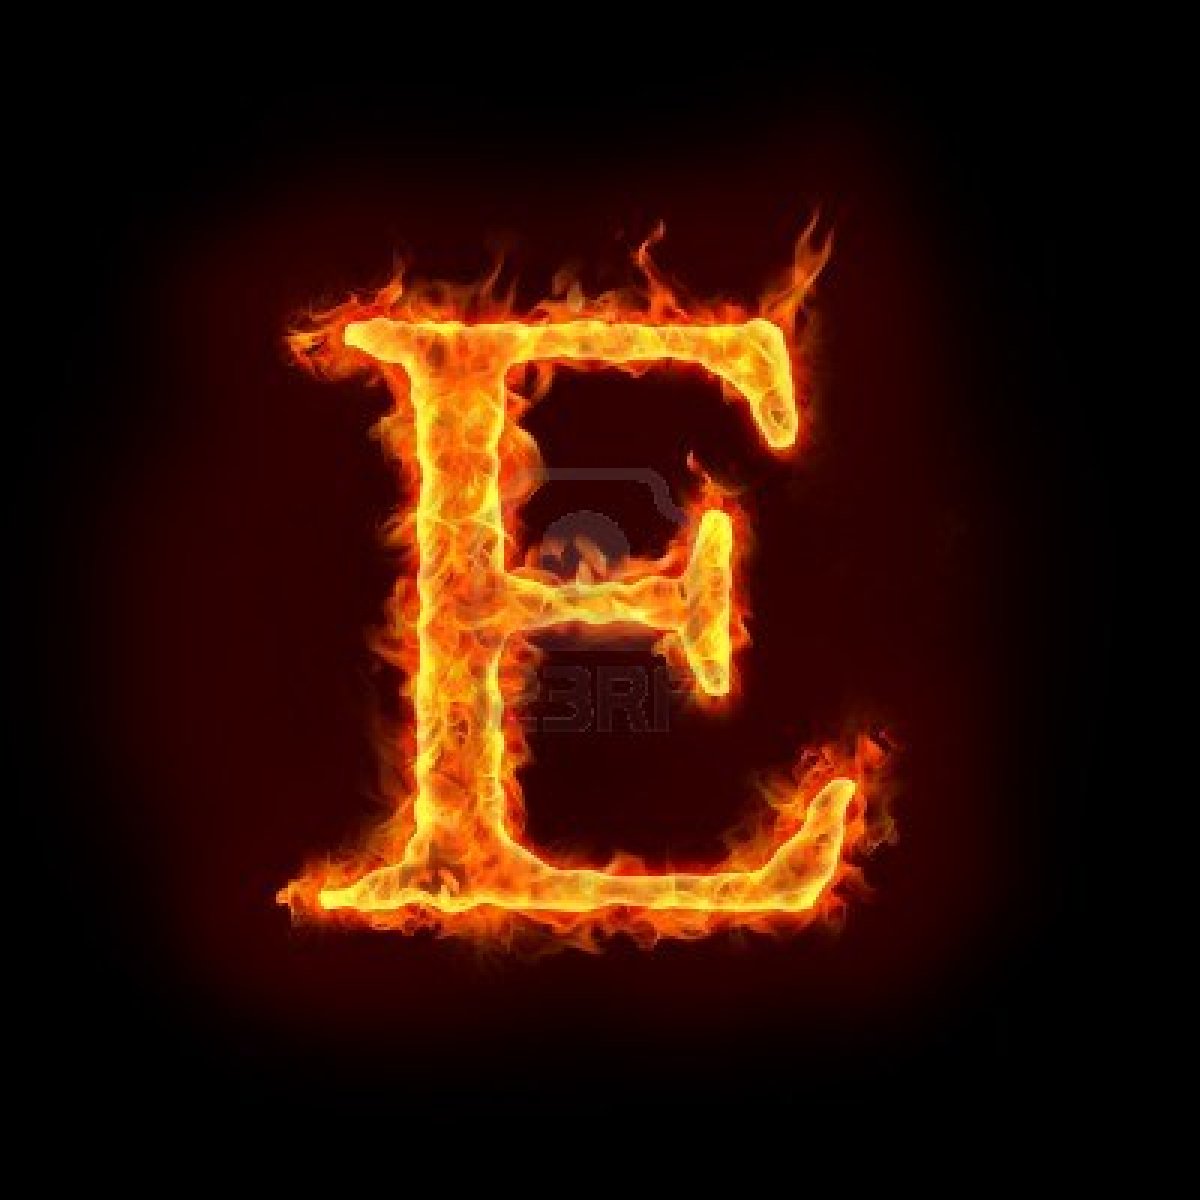 Image - 10232901-fire-alphabets-in-flame-letter-e.jpg ...